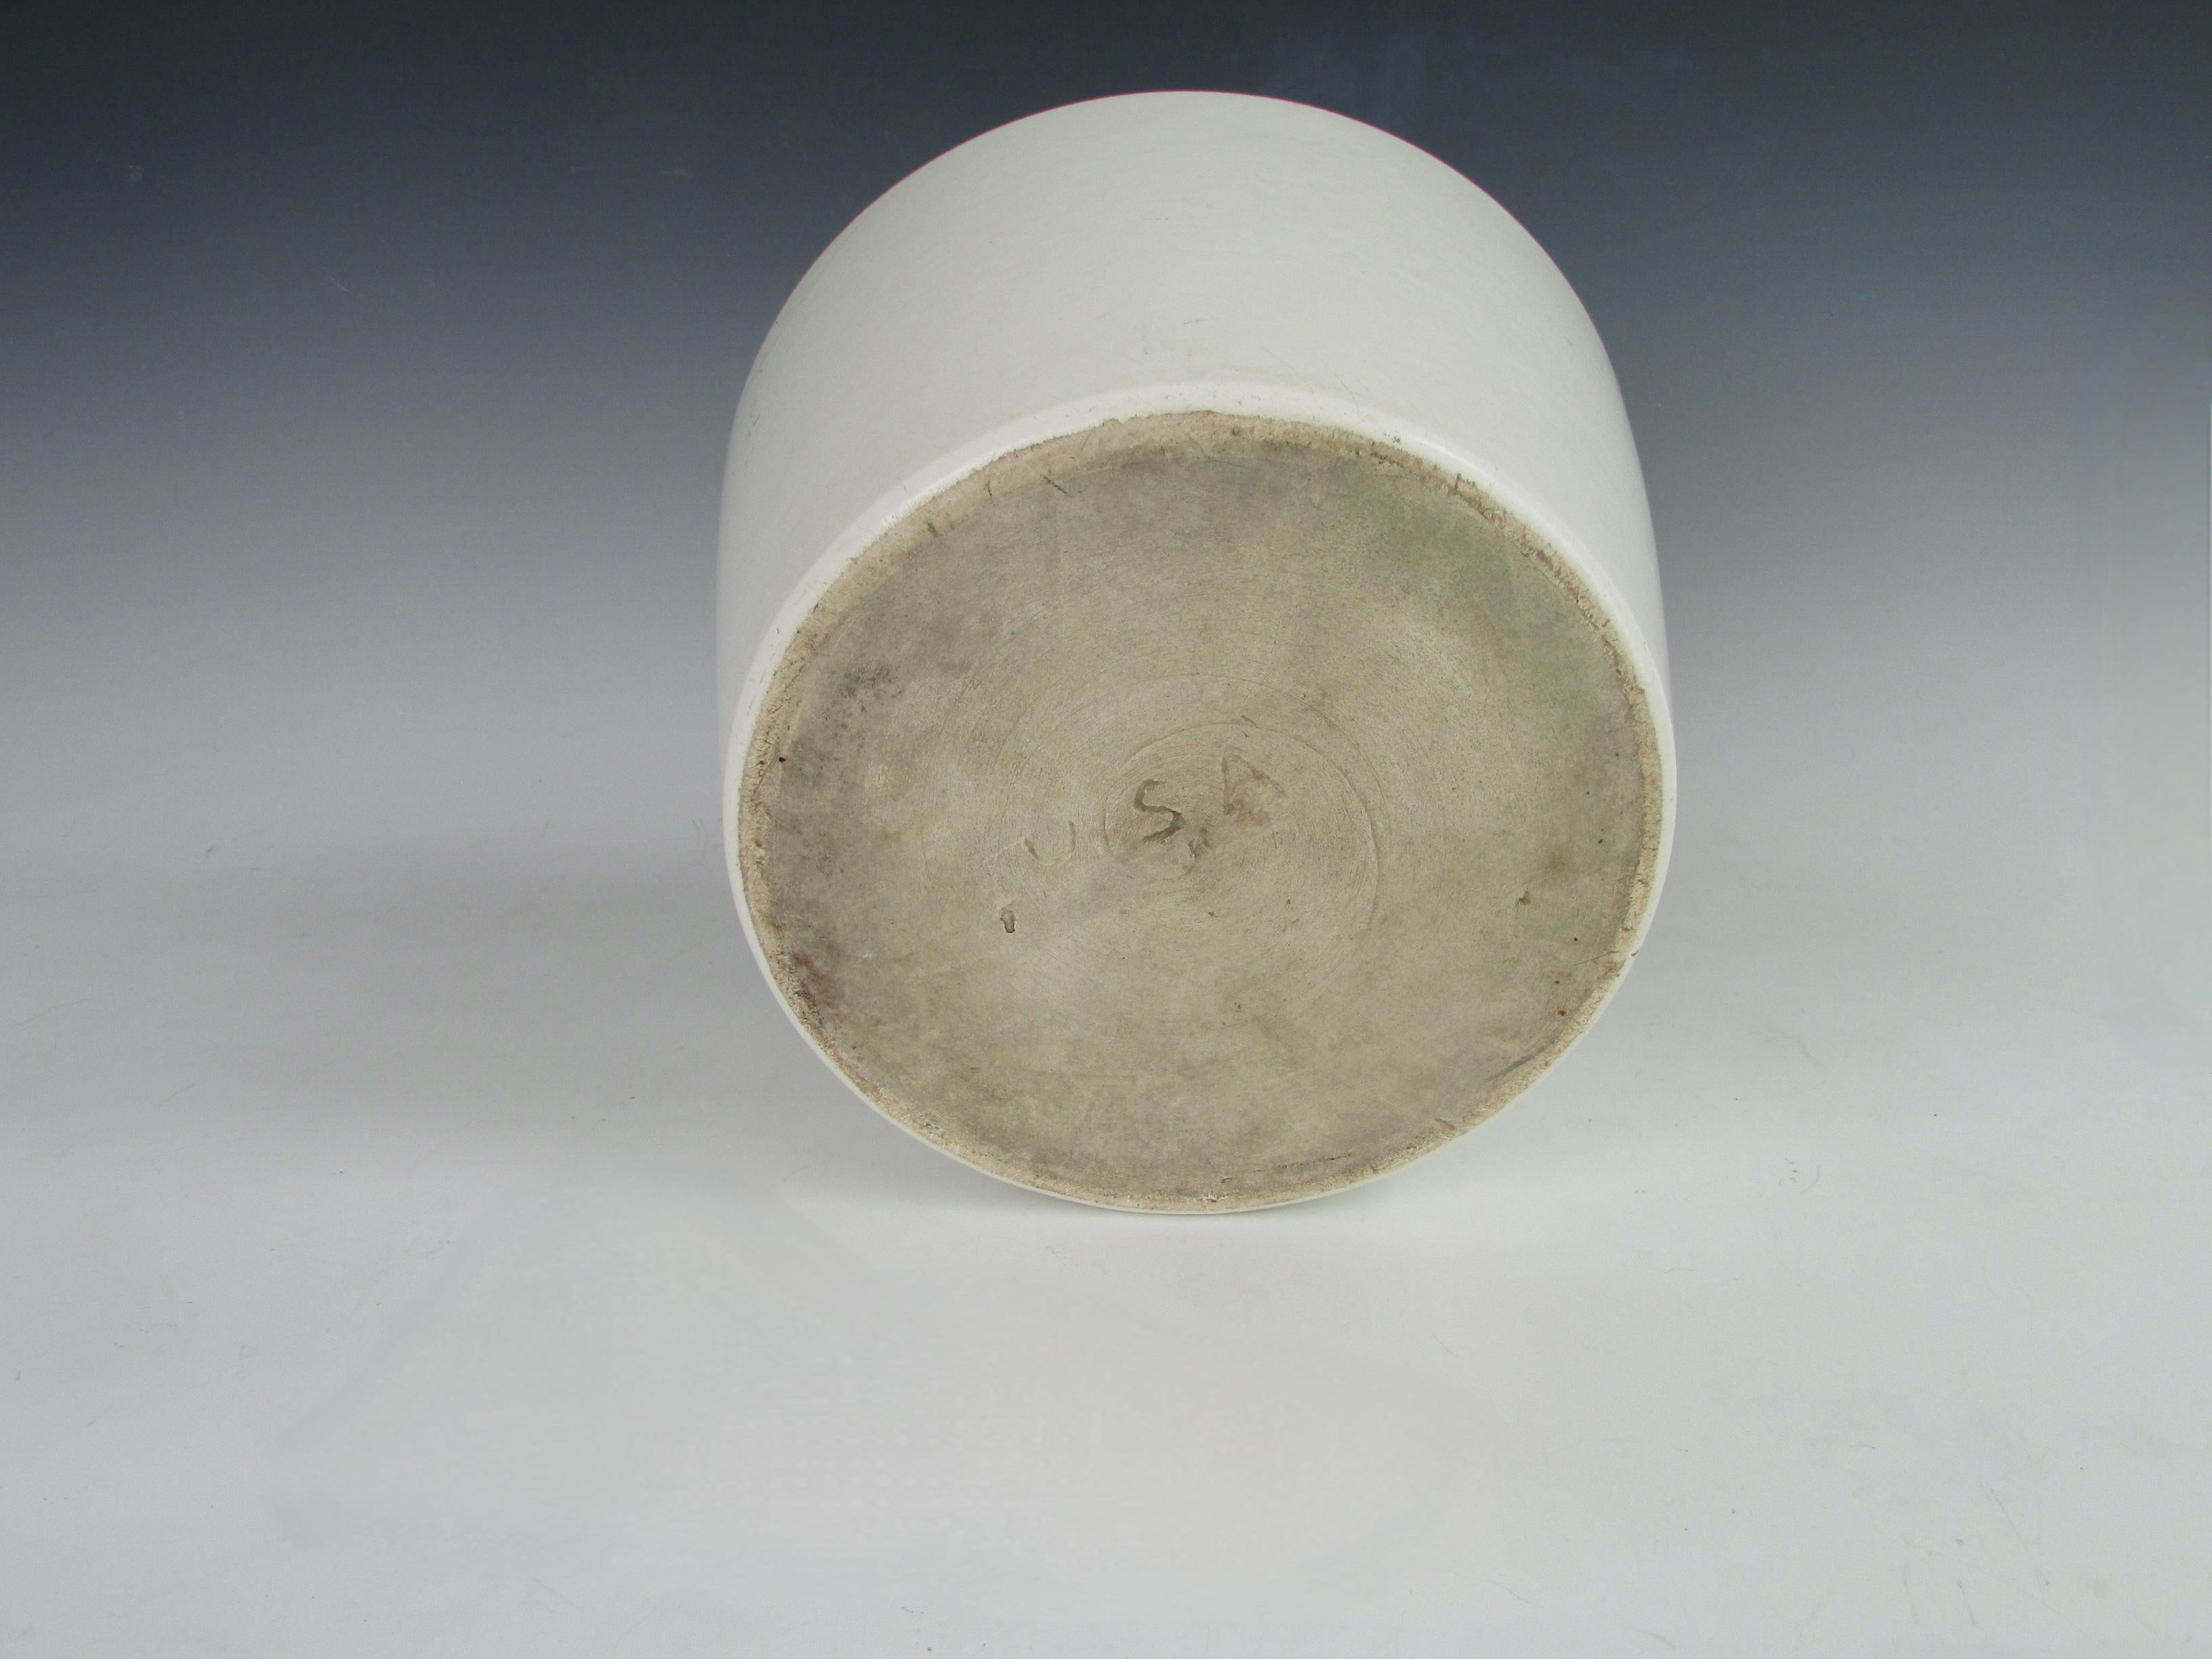 Matte White Planter Pot Attributed to Architectural Pottery California In Good Condition For Sale In Ferndale, MI